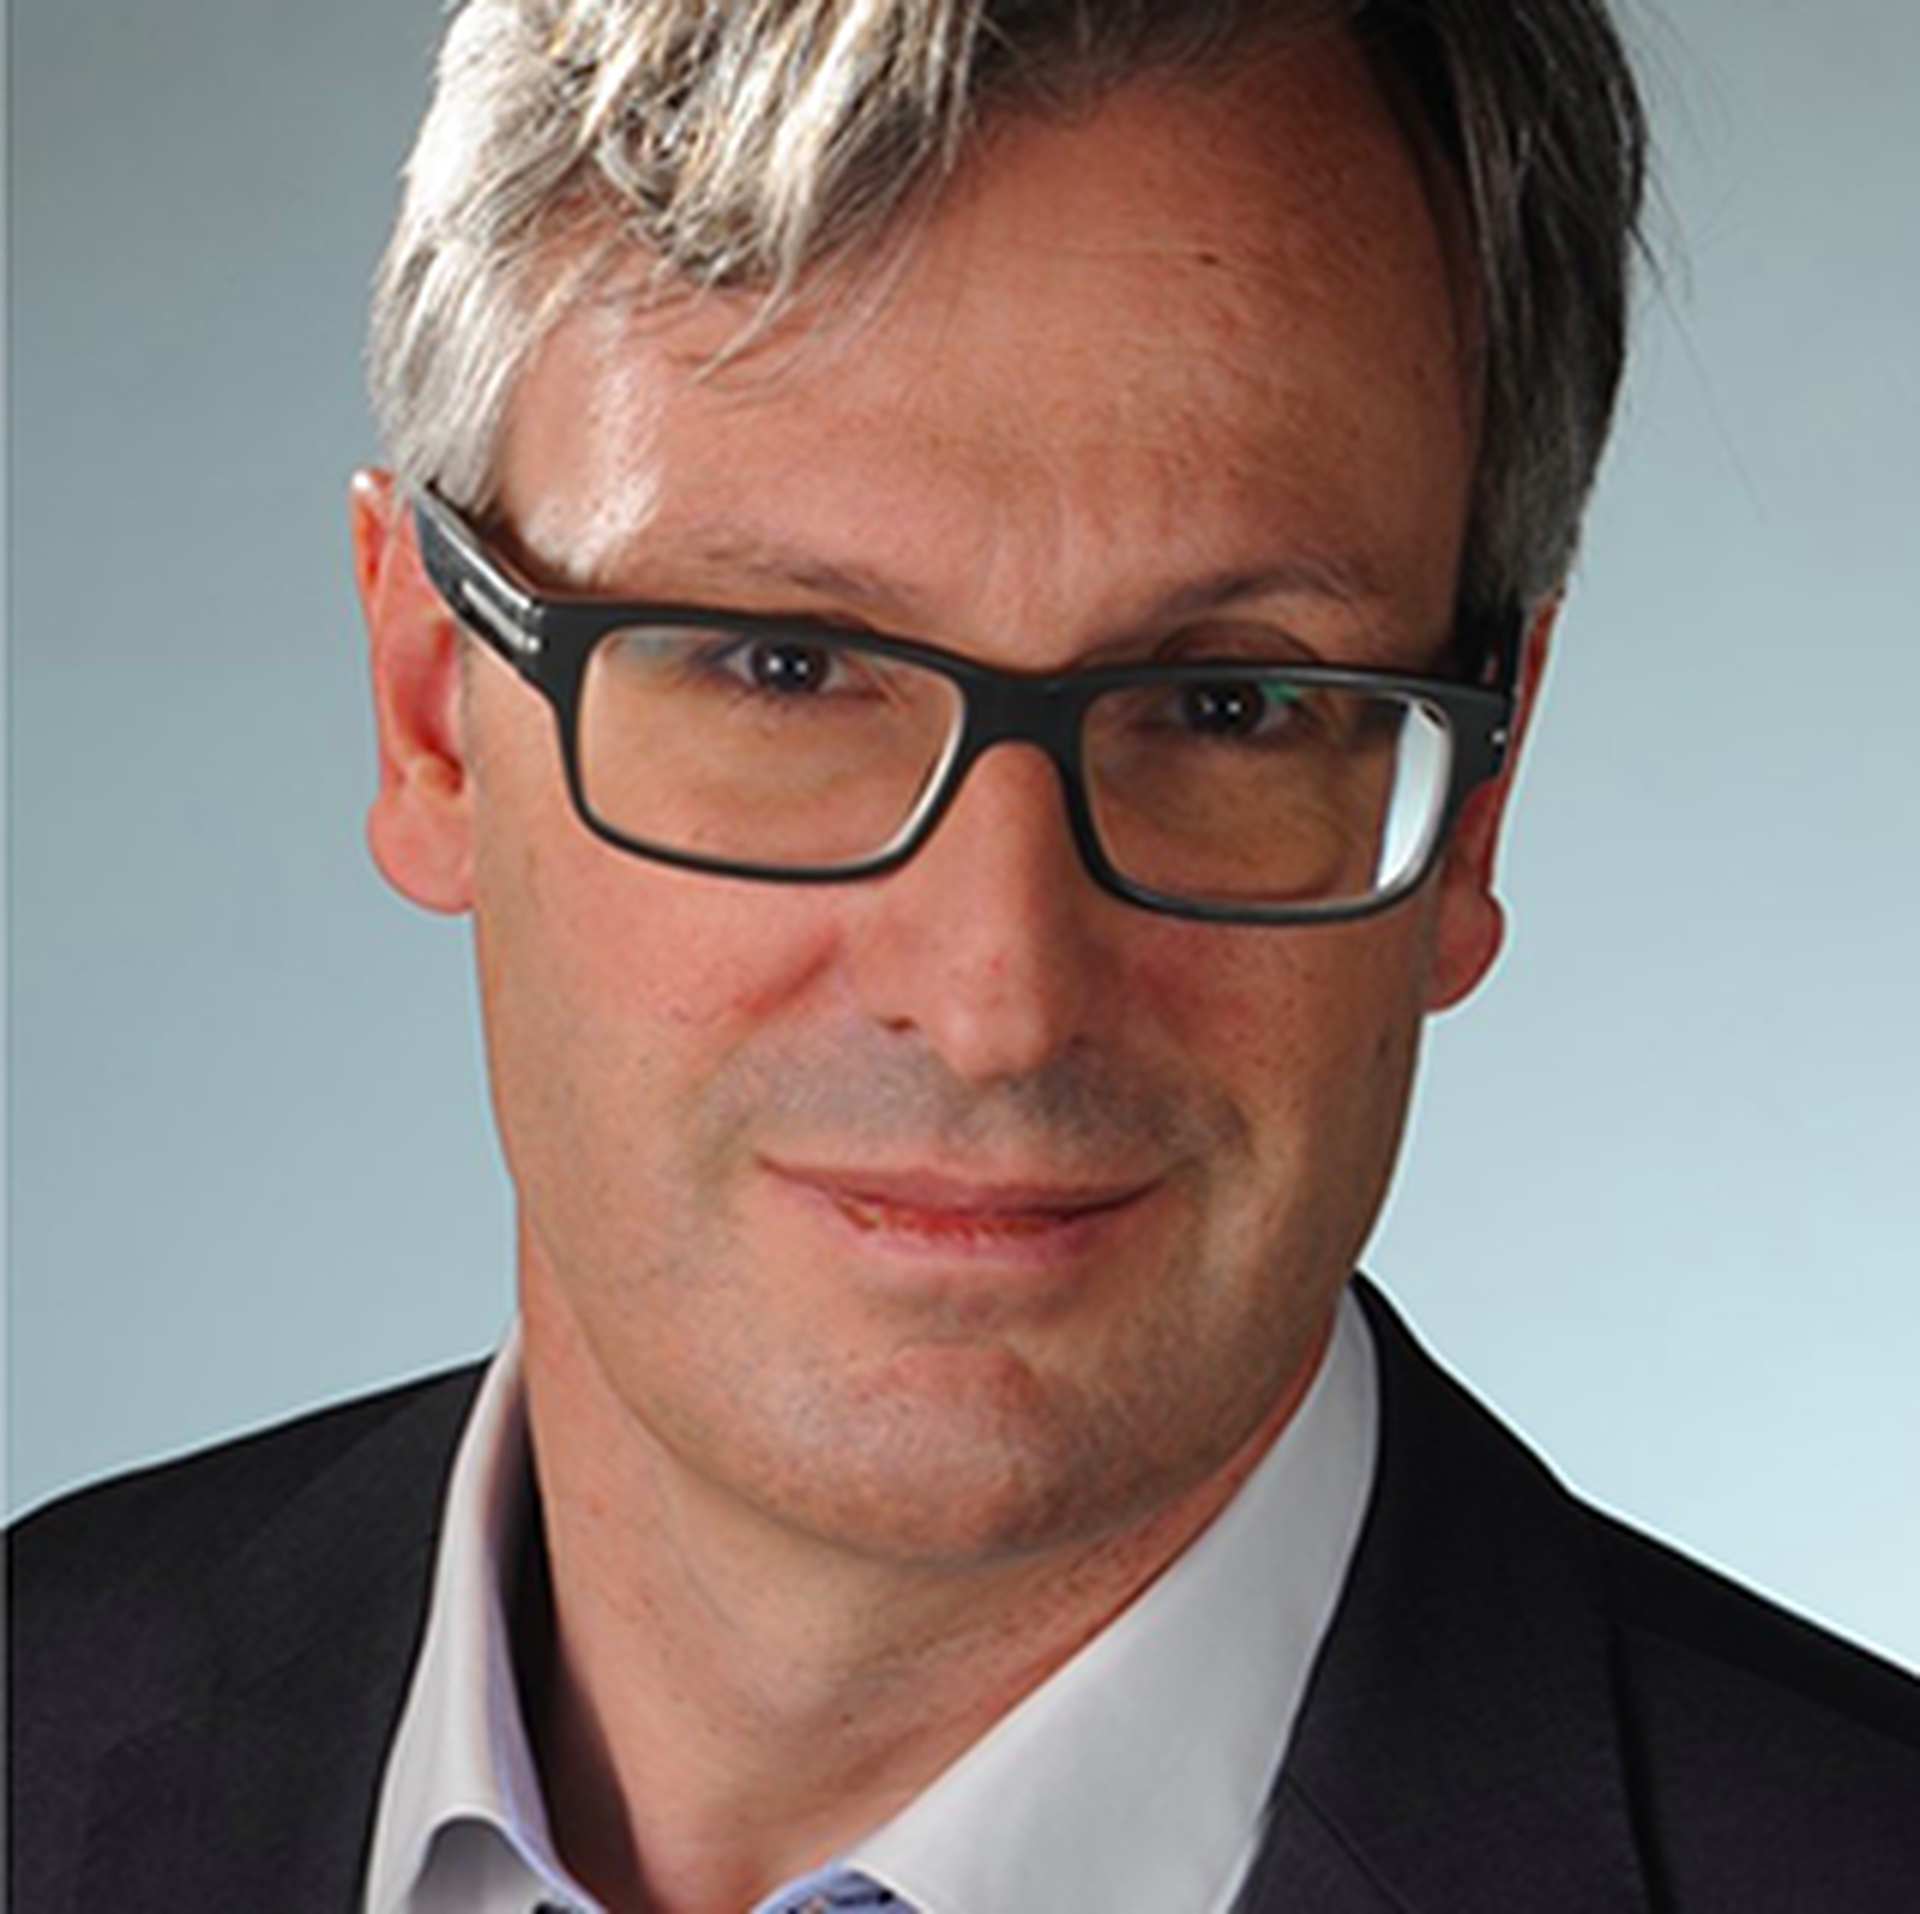 Olivier Girard, country managing director of Accenture in France and Benelux